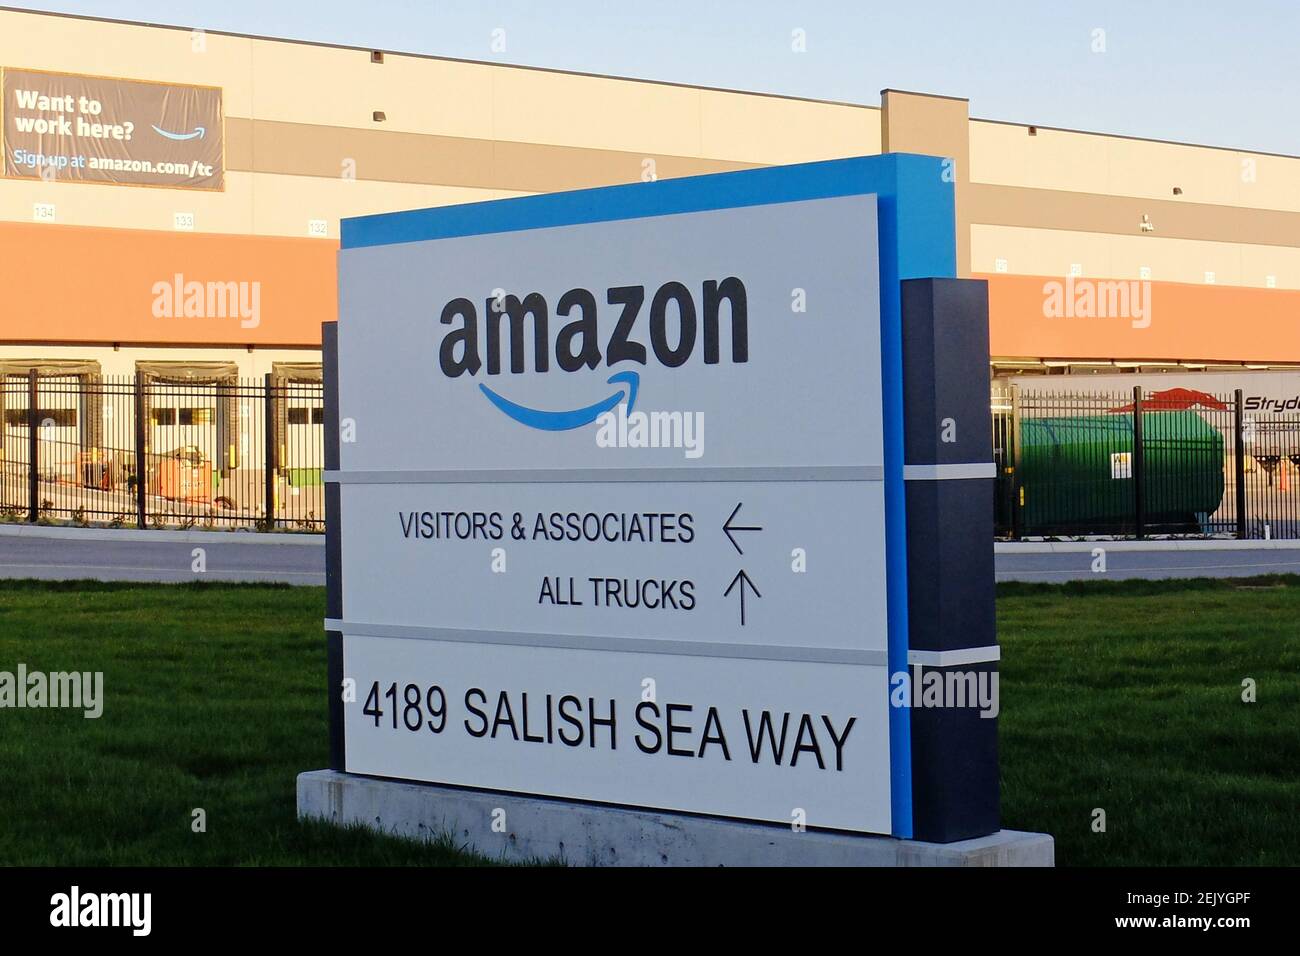 Amazon's 450,000 square foot warehouse is seen in the Delta iPort  industrial business park, on Tsawwassen First Nations Lands, during the  COVID19 pandemic, on April 9, 2020, in Delta, B.C., Canada. Amazon